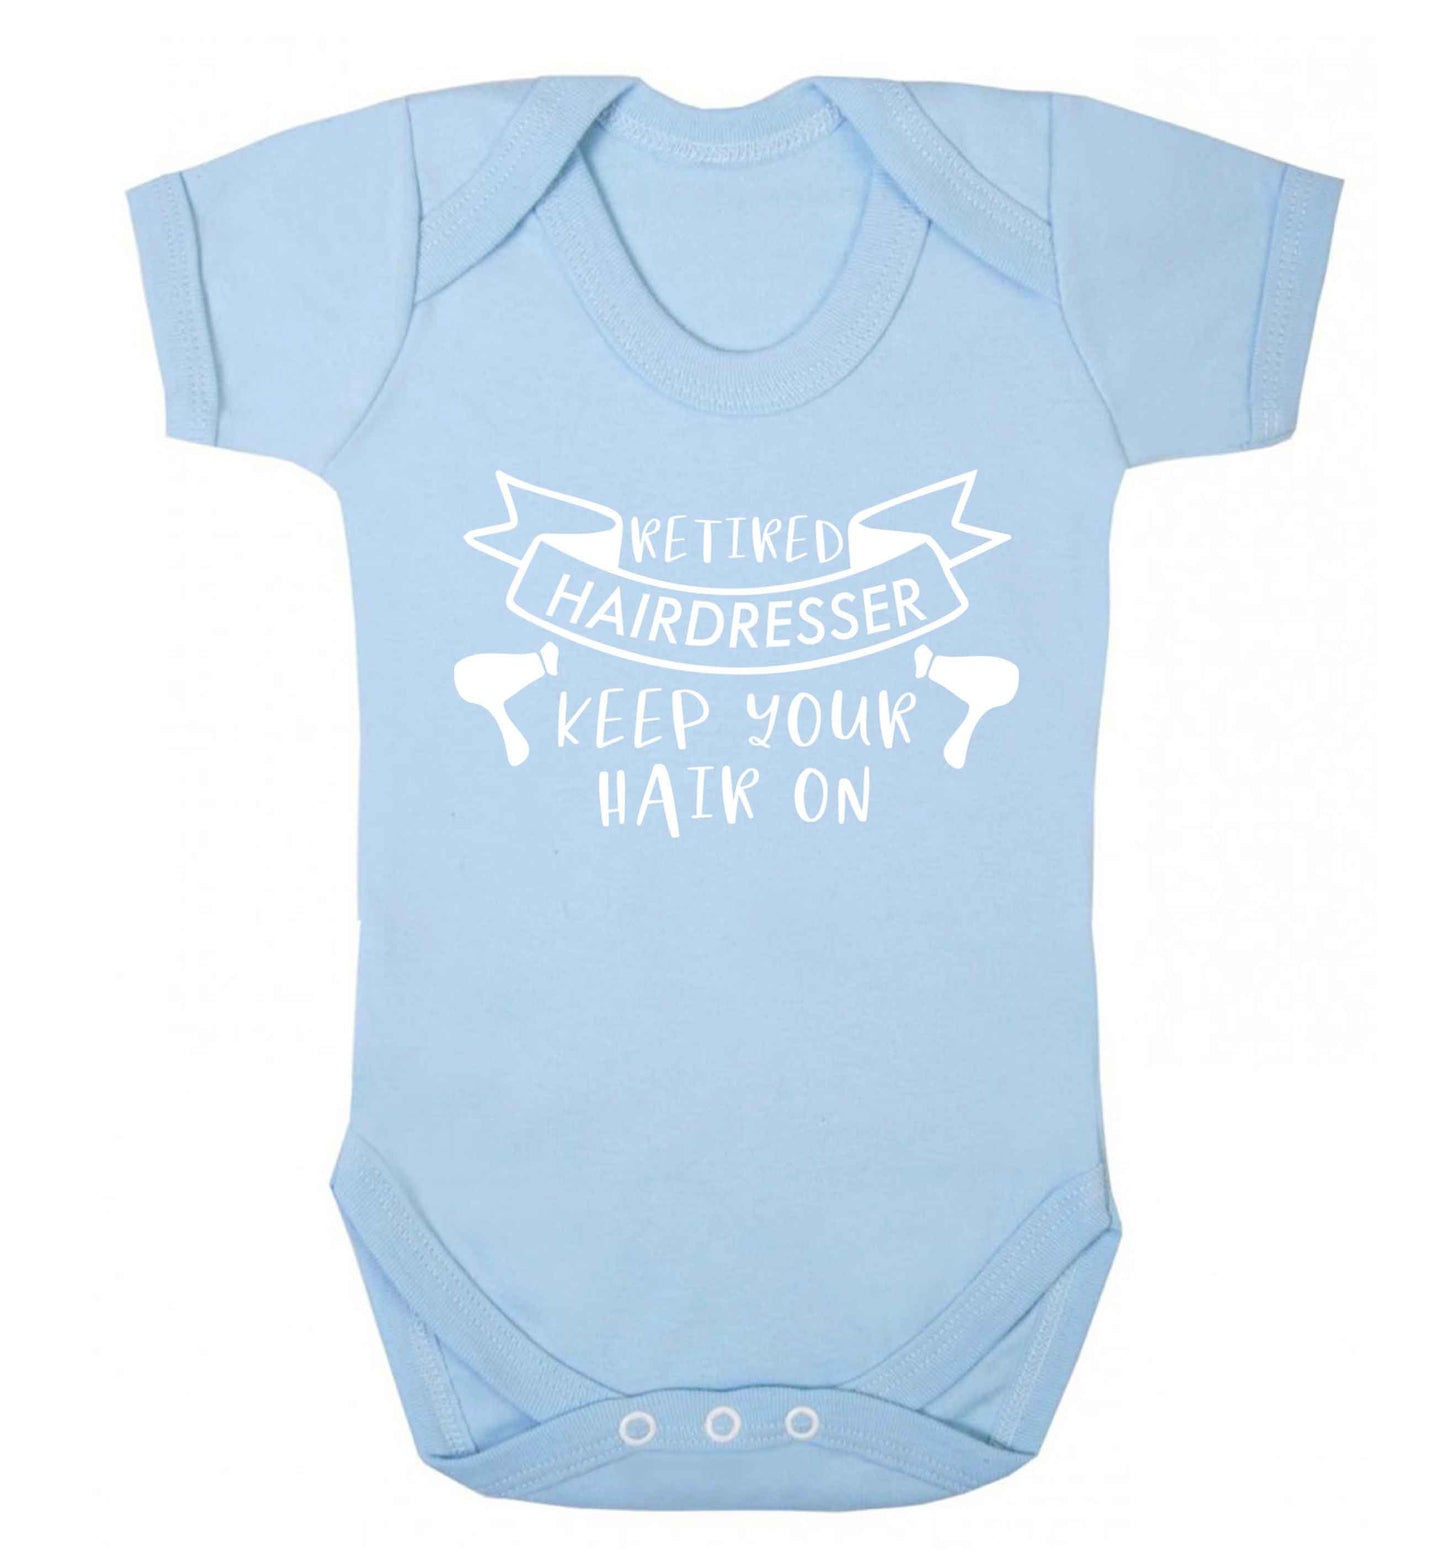 Retired hairdresser keep your hair on Baby Vest pale blue 18-24 months